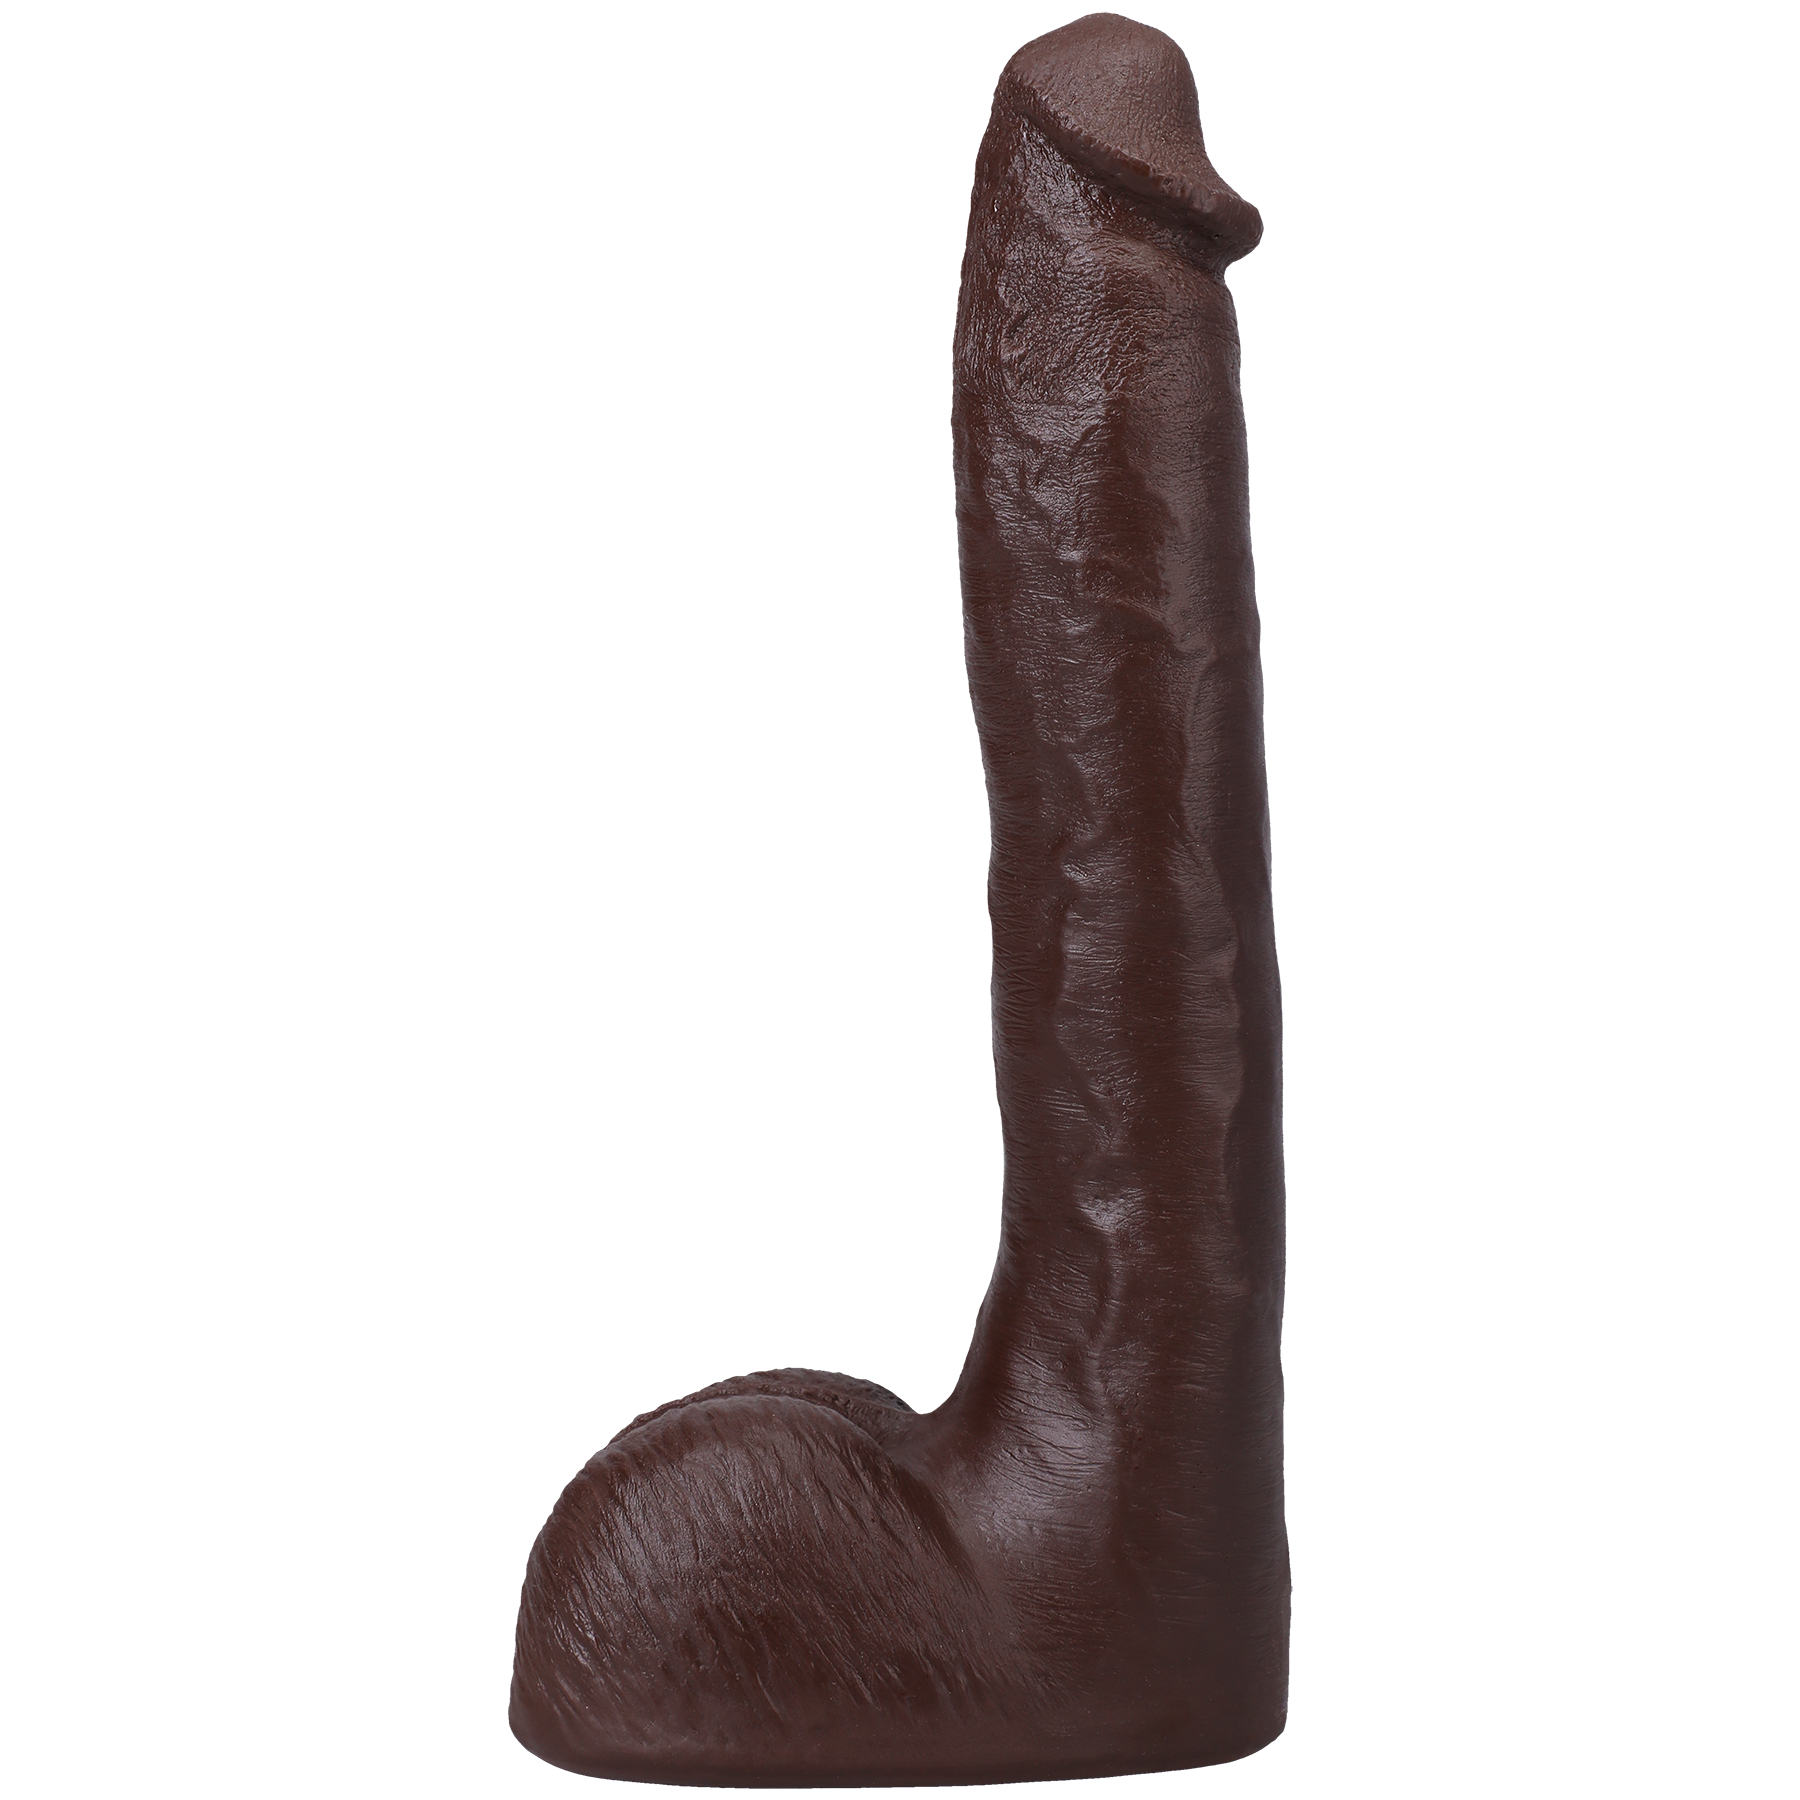 Signature Cocks - Pressure - 10 Inch ULTRASKYN Cock with Removable Vac-U-Lock Suction Cup